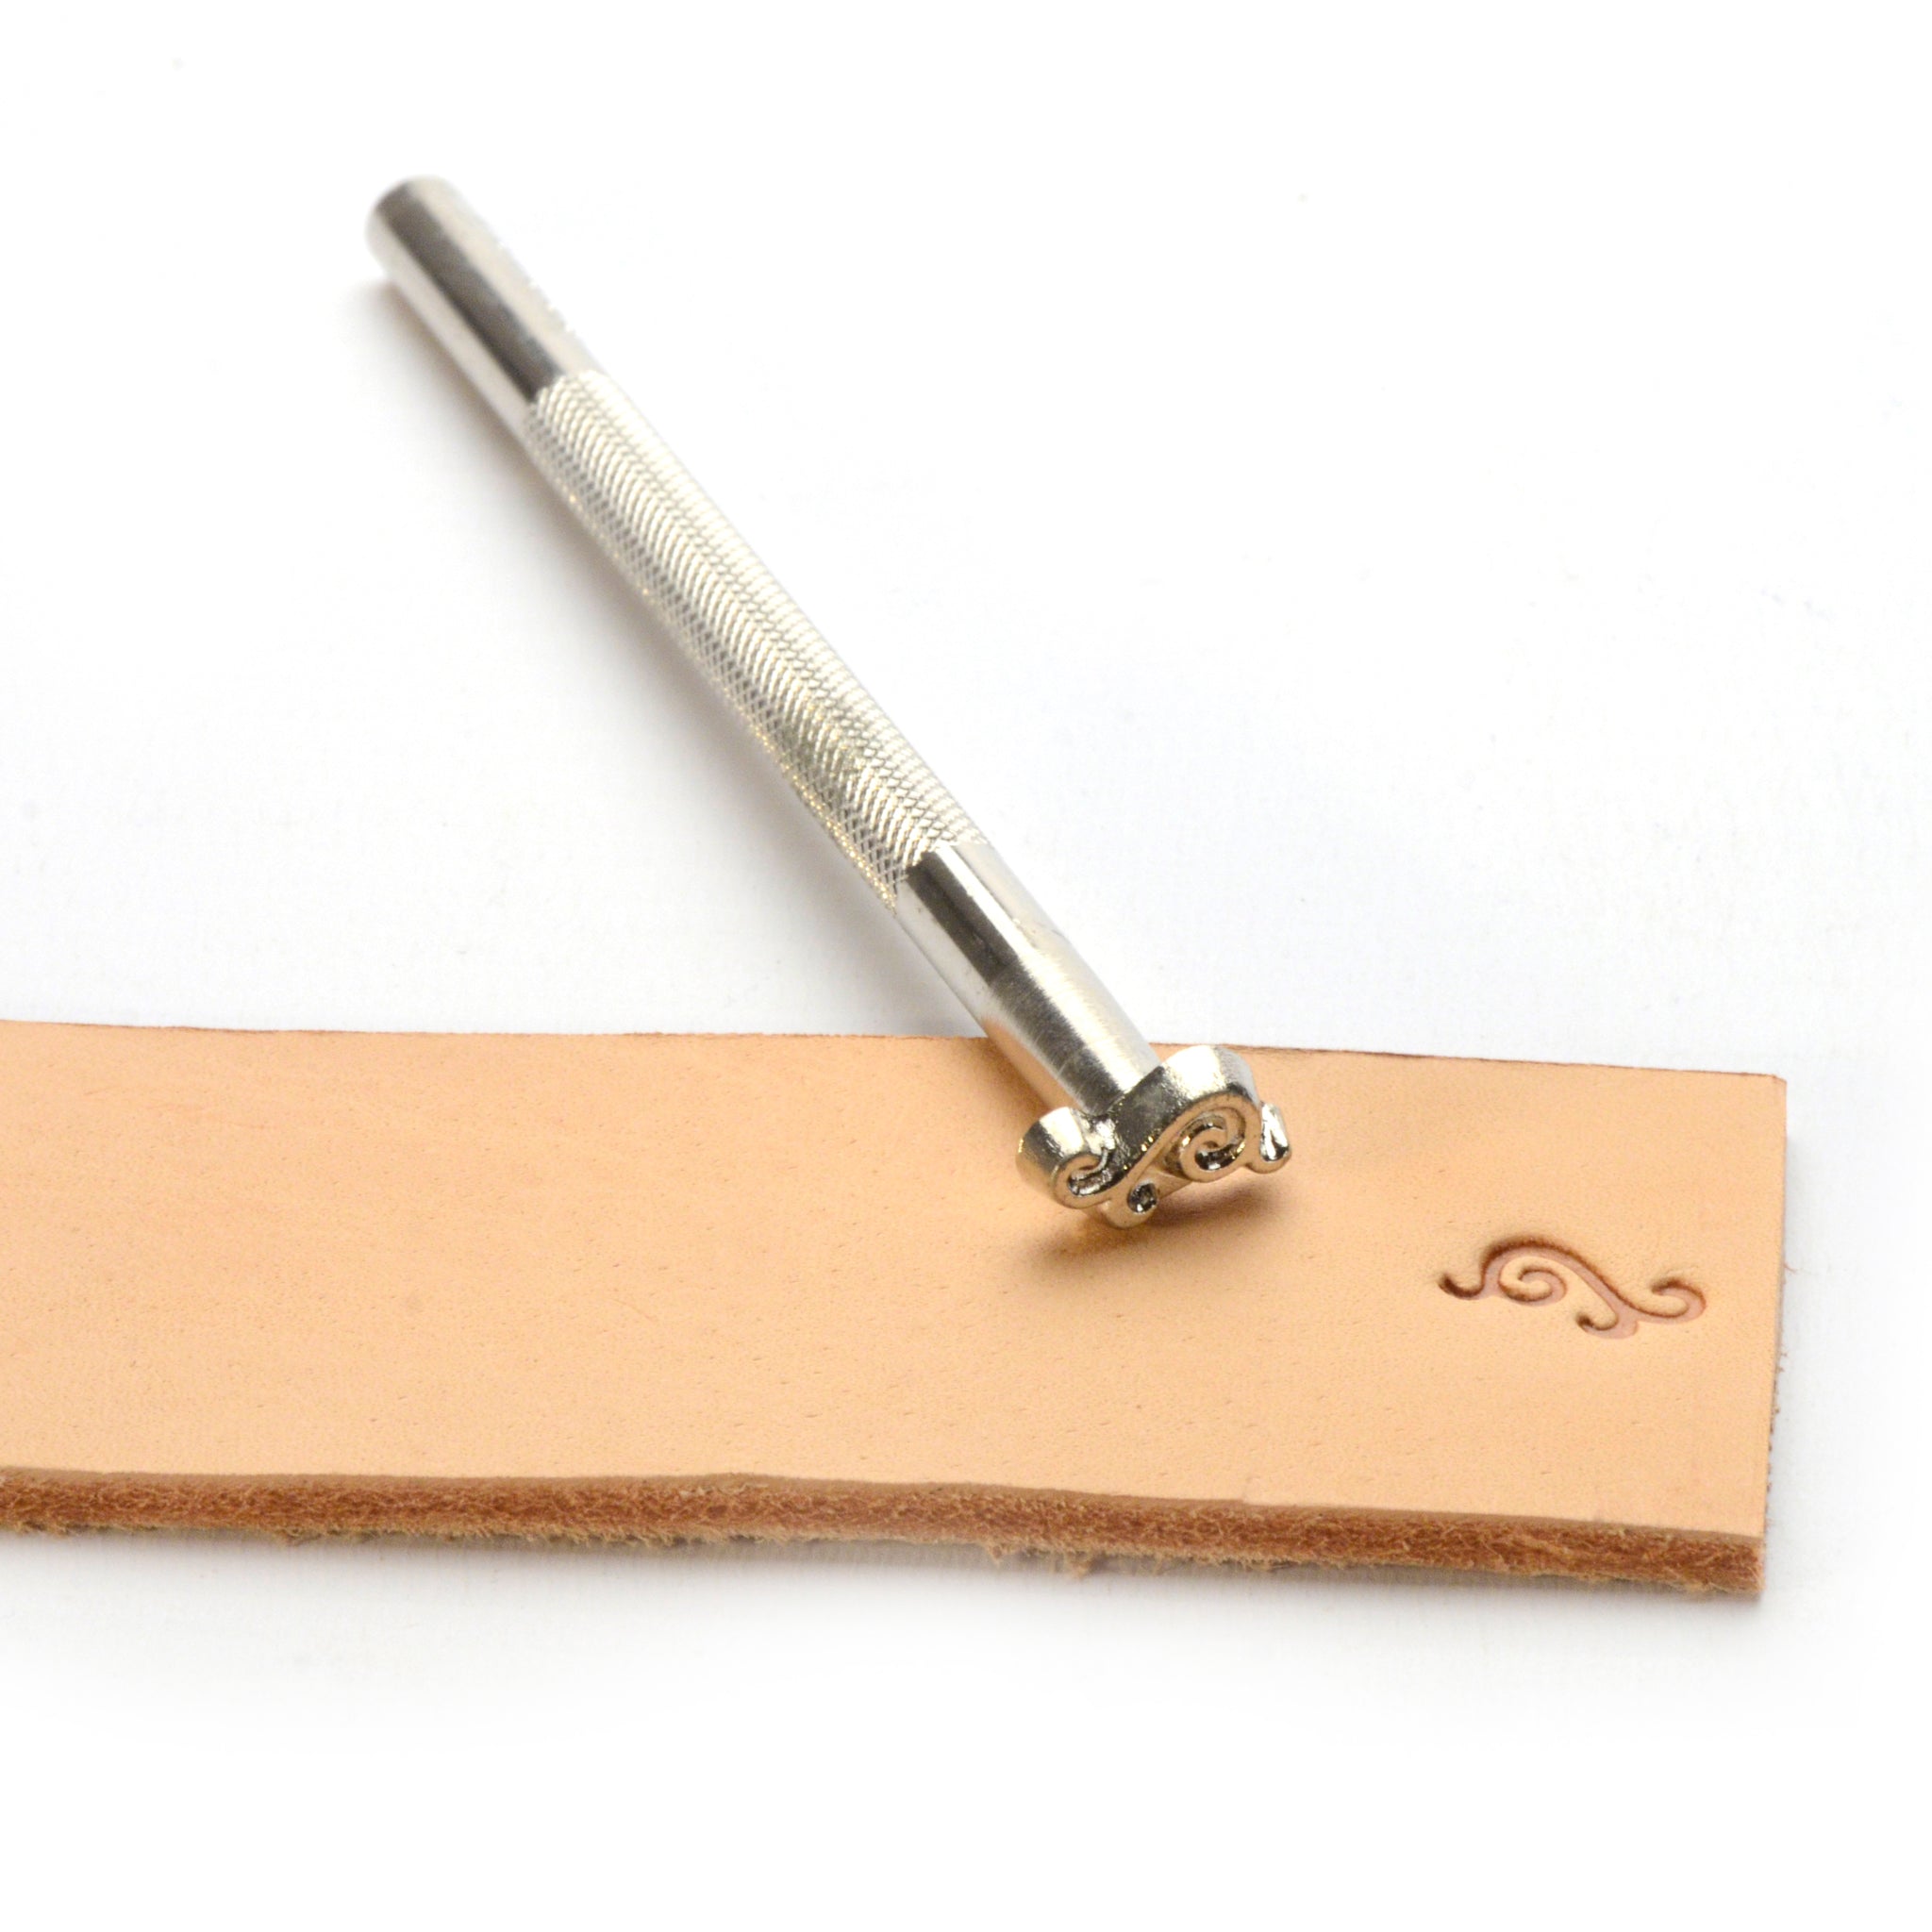 Simple Scroll Embossing Stamp from Identity Leathercraft